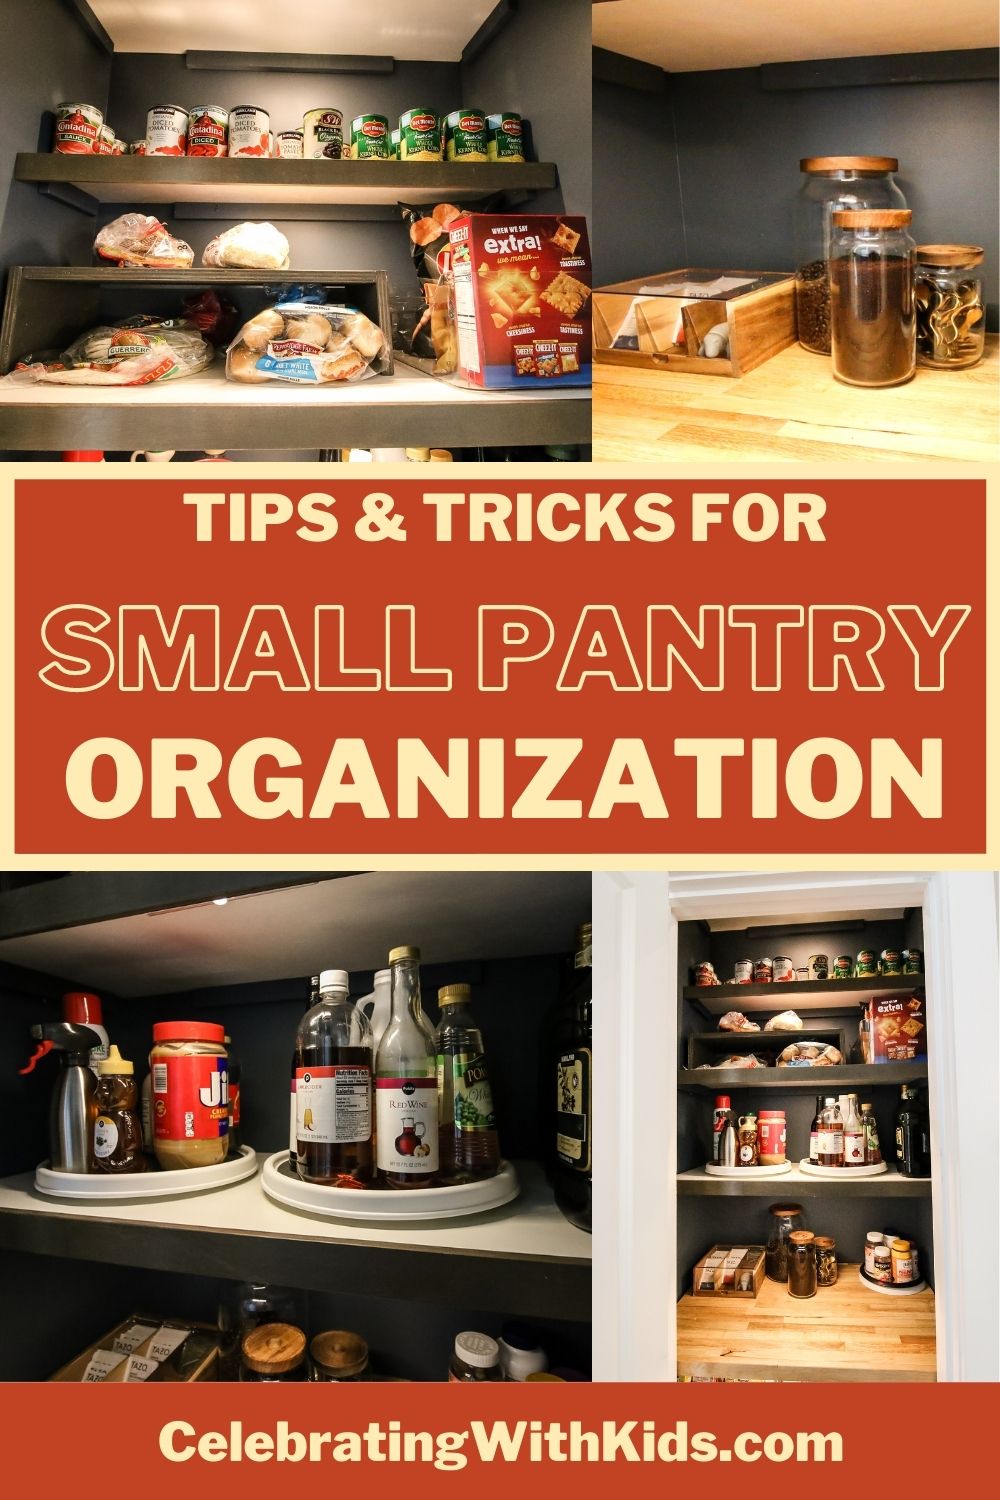 Small Pantry Makeover full of Inexpensive Organization